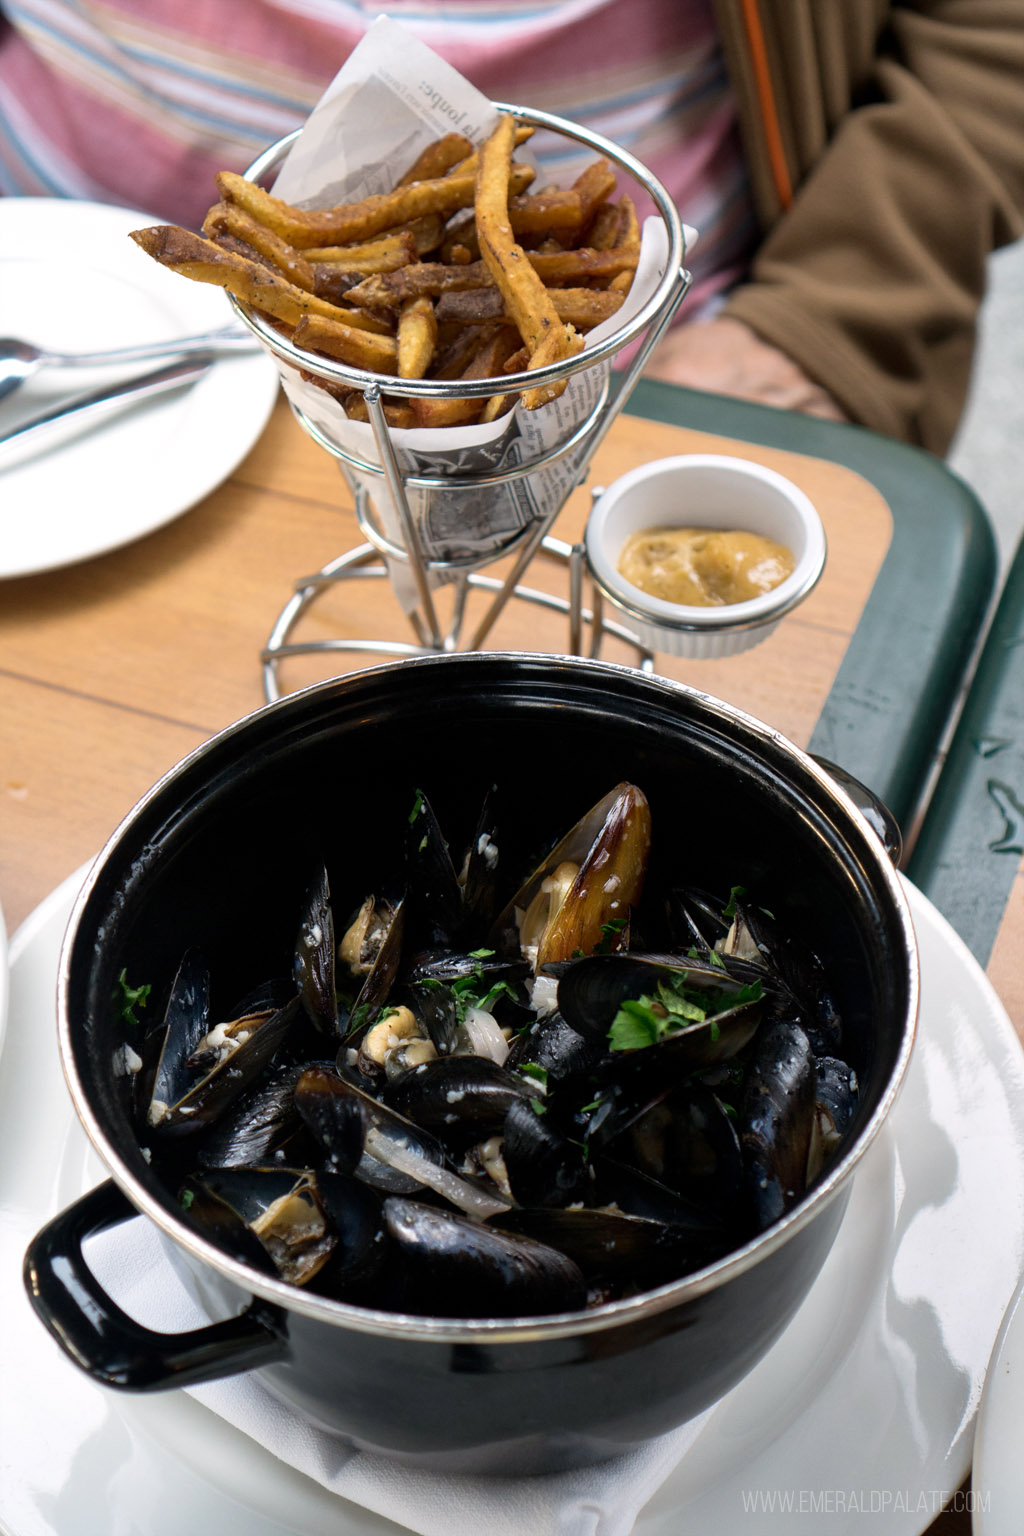 mussels and frites from one of the best French restaurants in Seattle